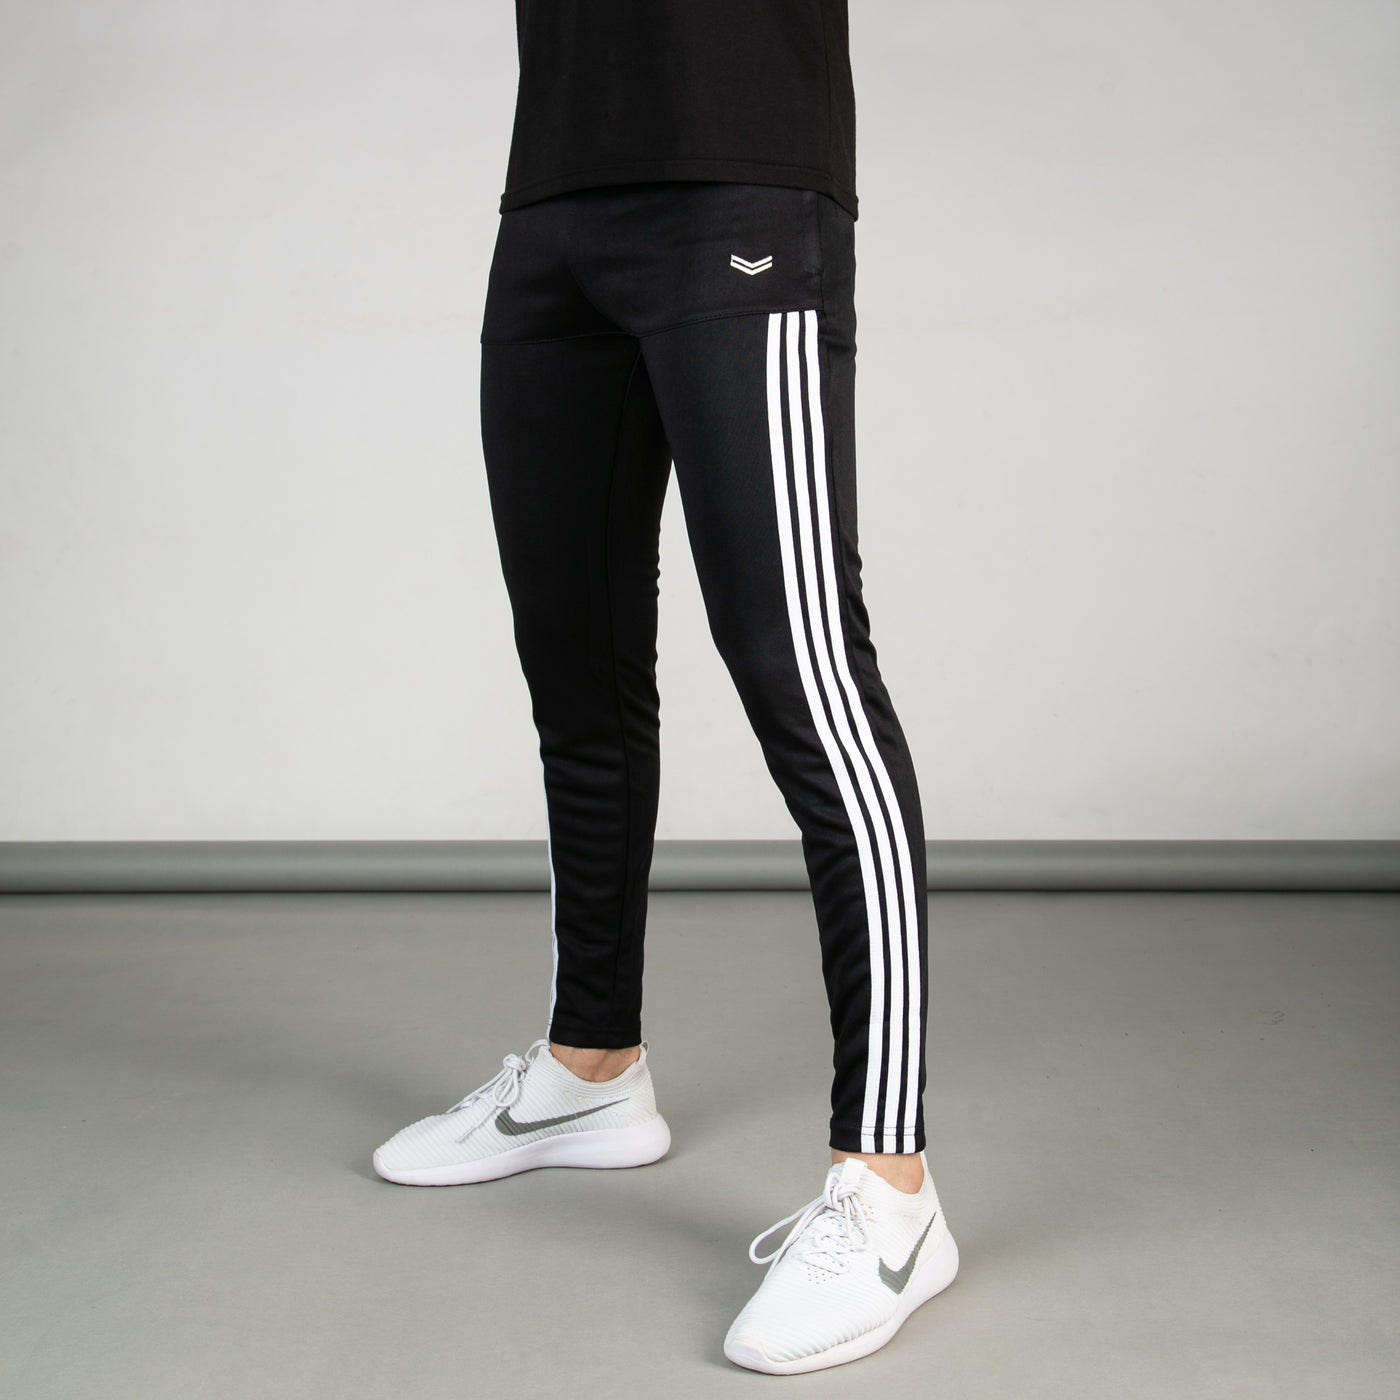 Black Quick Dry Paneled Bottoms with Forward Three White Stripes